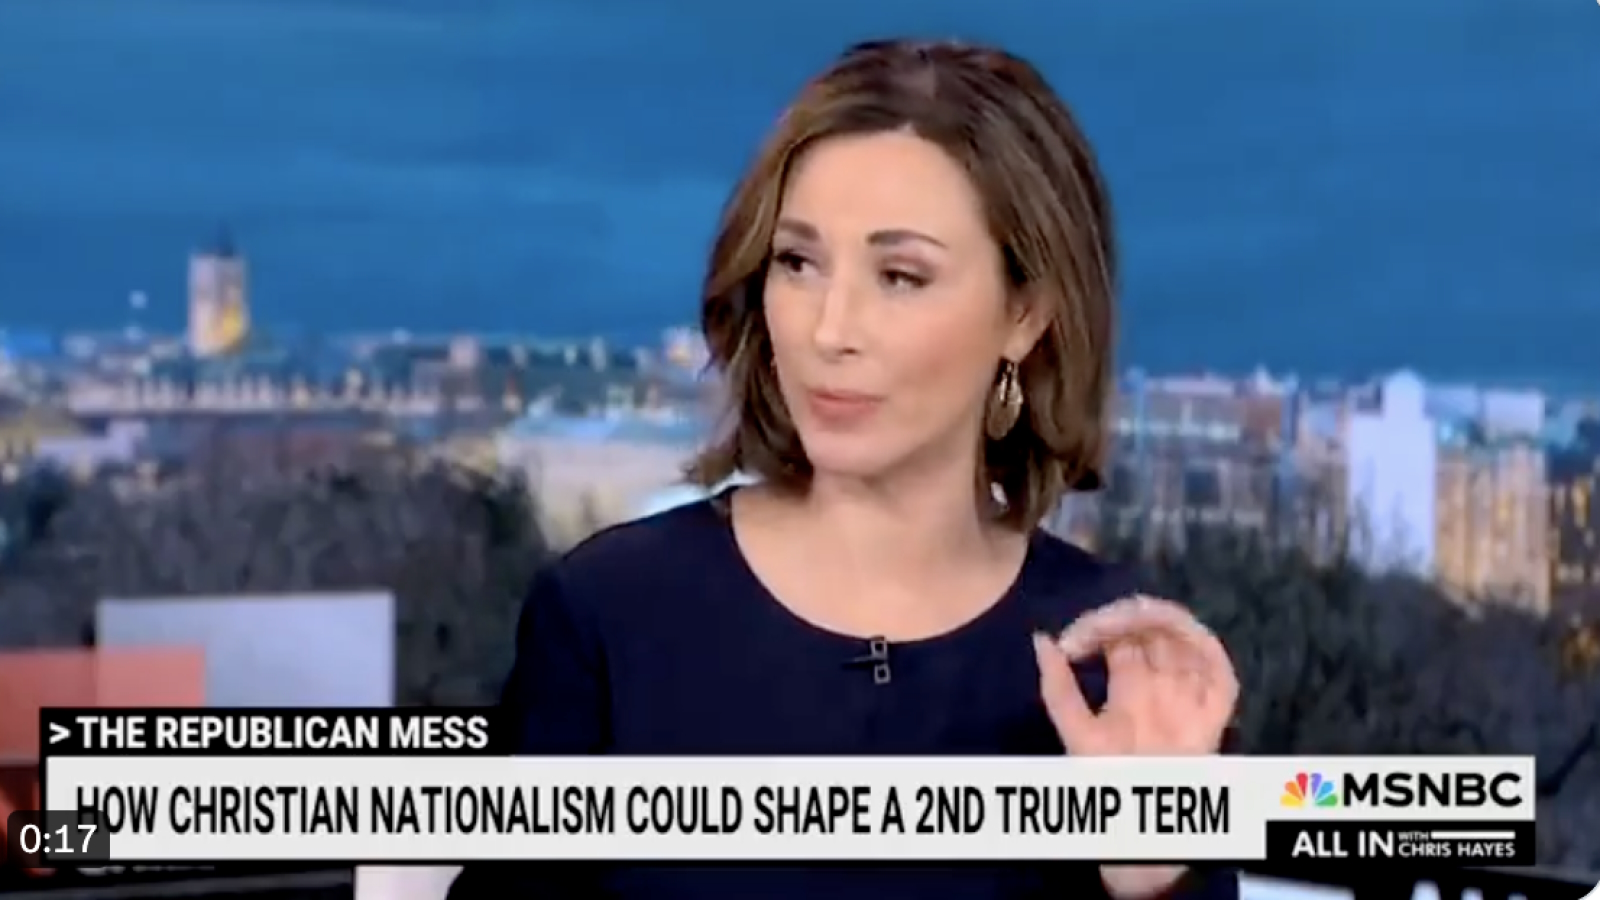 VIDEO: MSNBC Host Bashes Christians for Believing that “Rights Come From God”